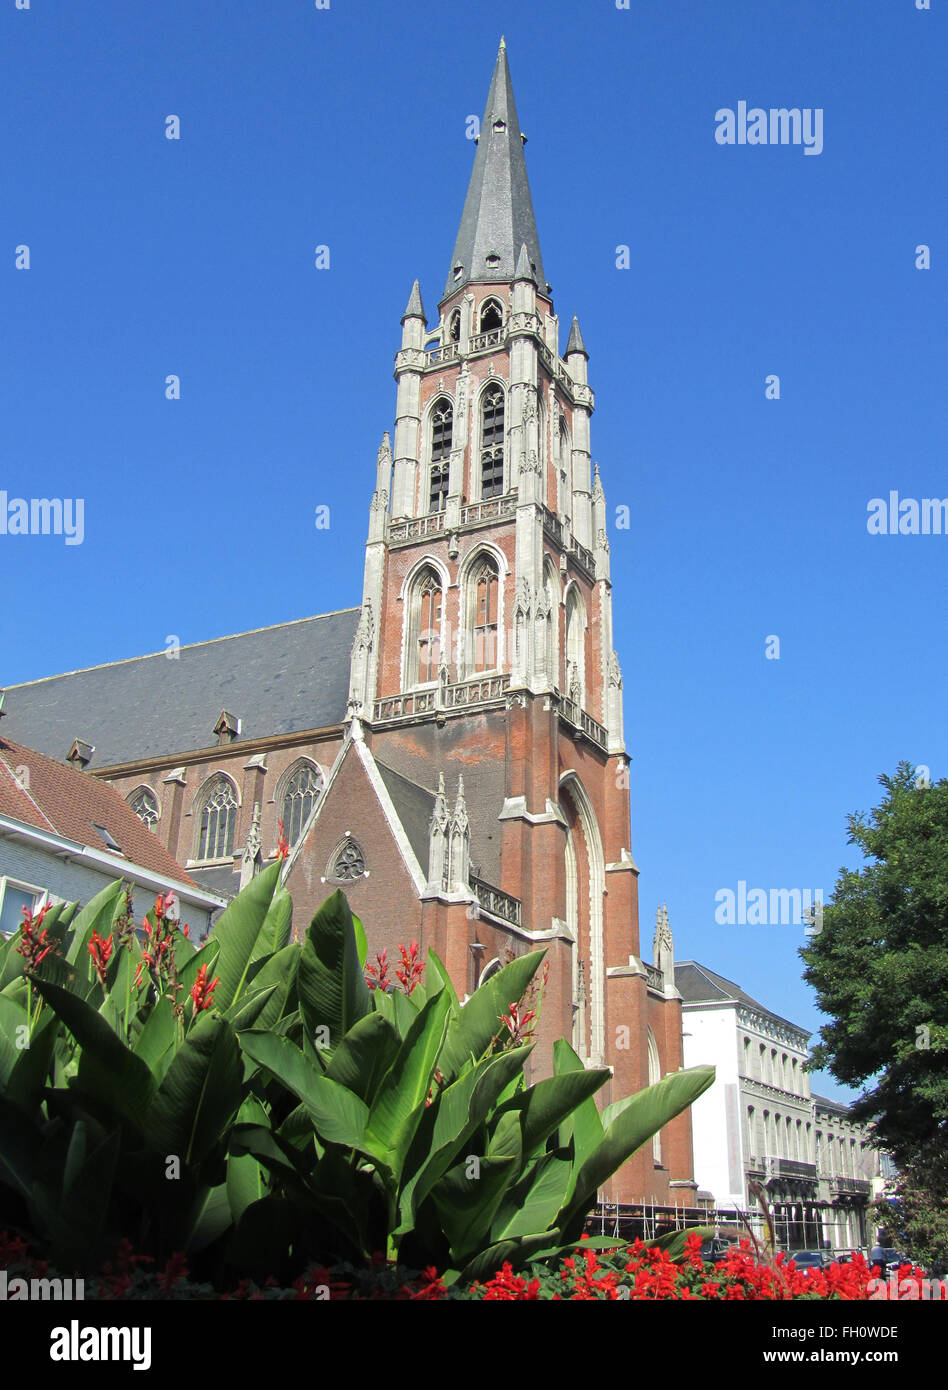 SInt Jozef (St. Joseph's) church in Aalst. A neogothic building dating from 1877 that is a protected monument. Stock Photo